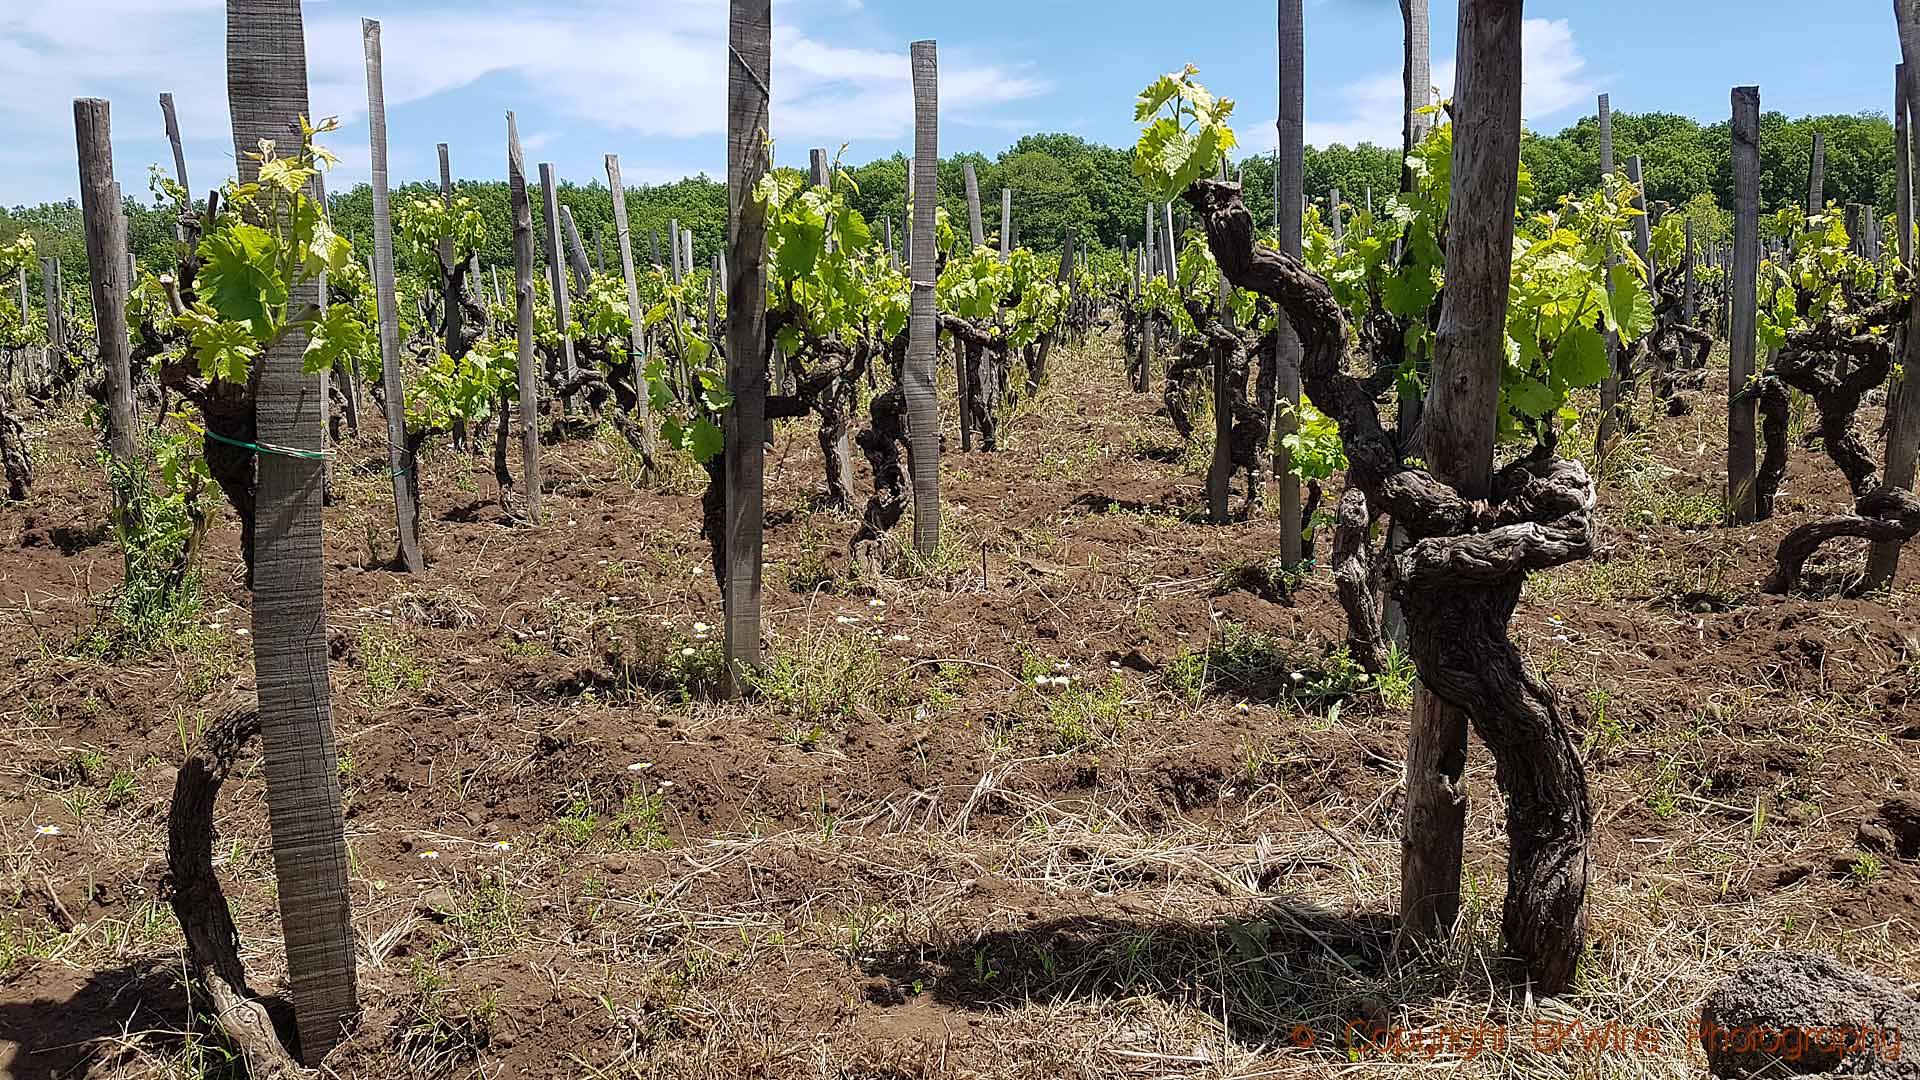 There are many old vines in the vineyard on Sicily